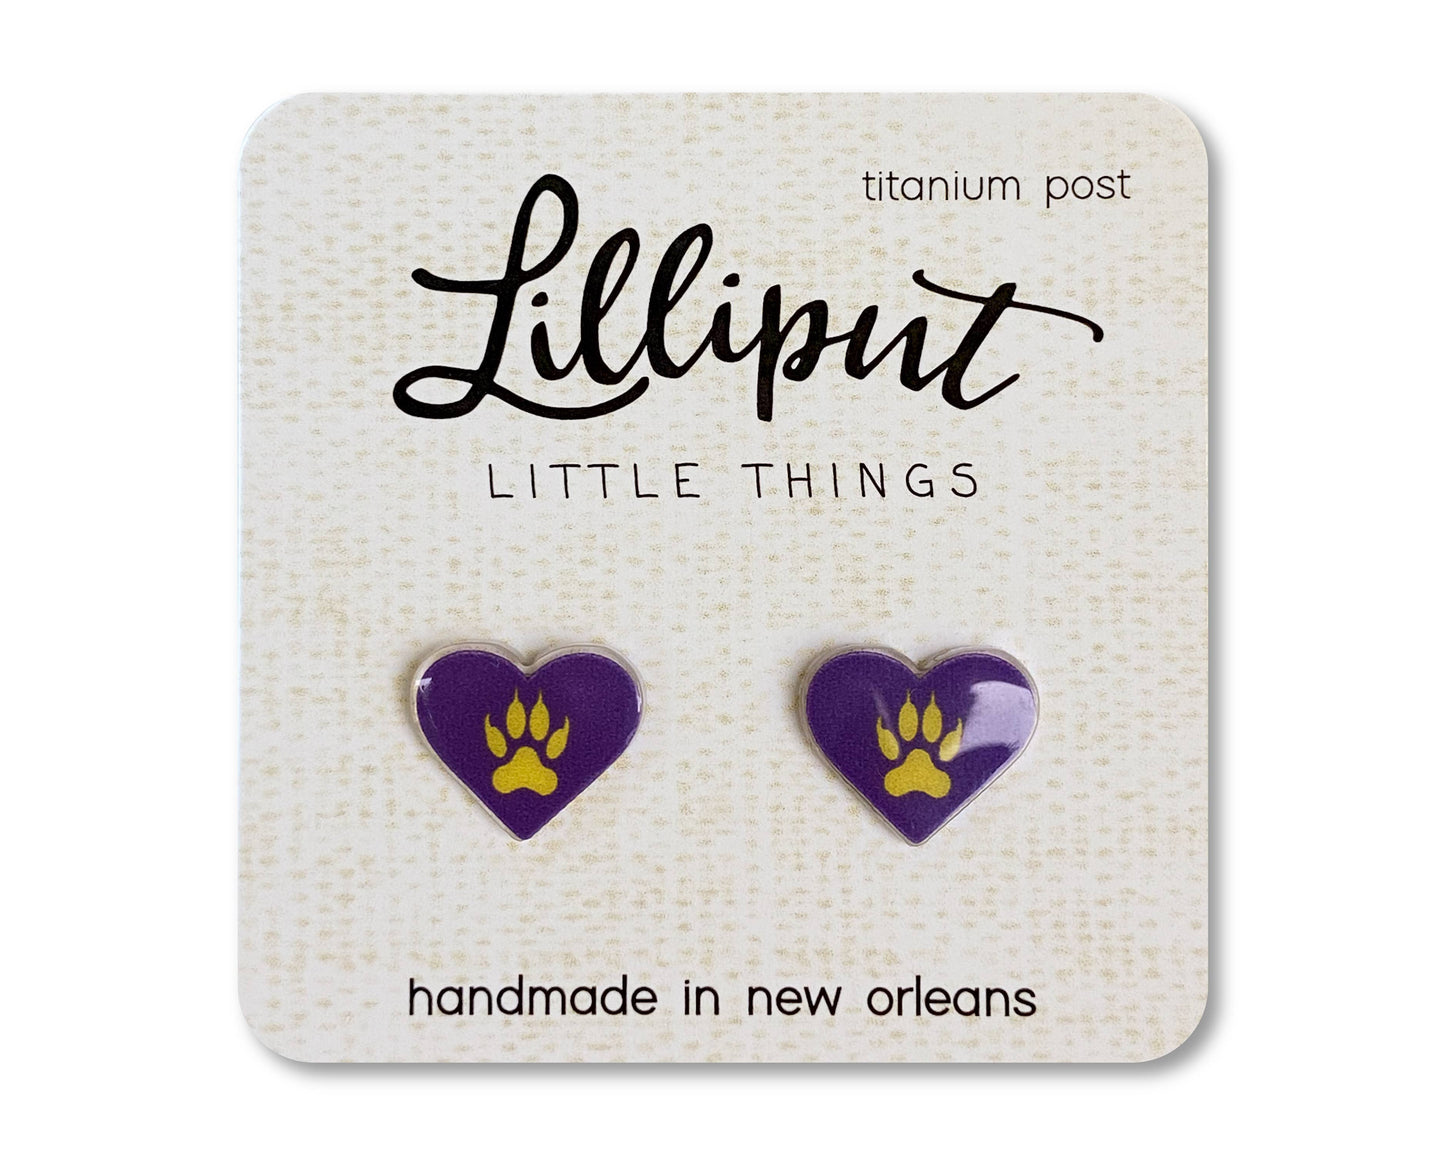 Lilliput Little Things - Tiger Paw Heart